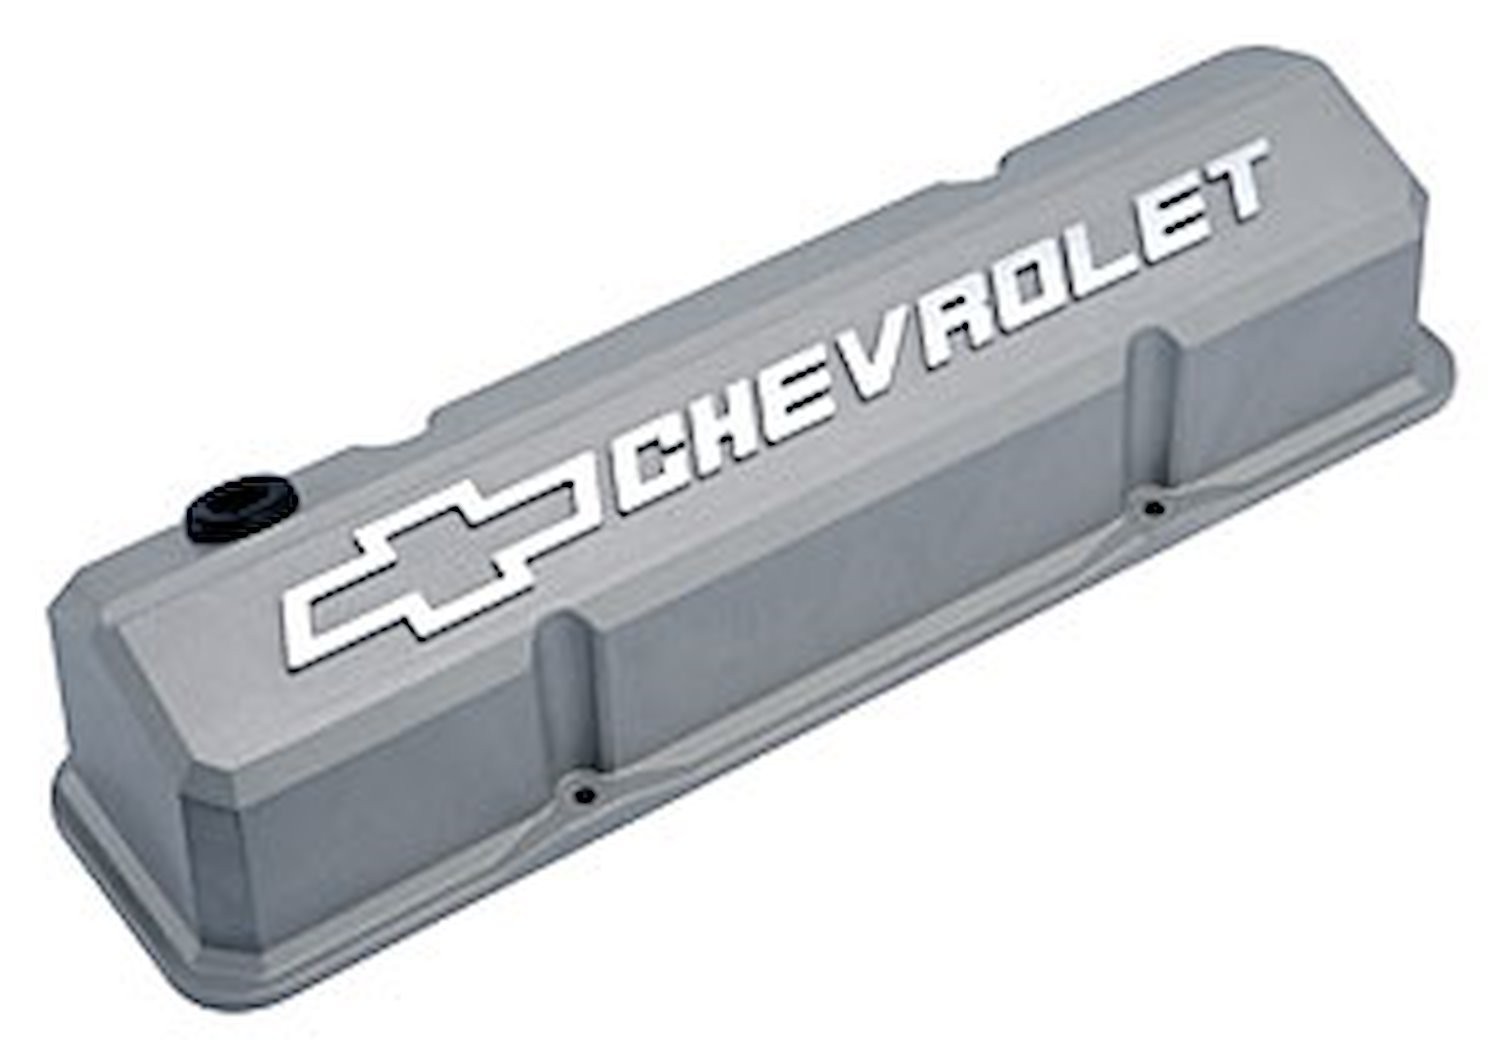 Die-Cast Slant-Edge Valve Covers for 1958-1986 Small Block Chevy with Chevrolet/Bowtie Raised Emblem in Cast Gray Crinkle Finish